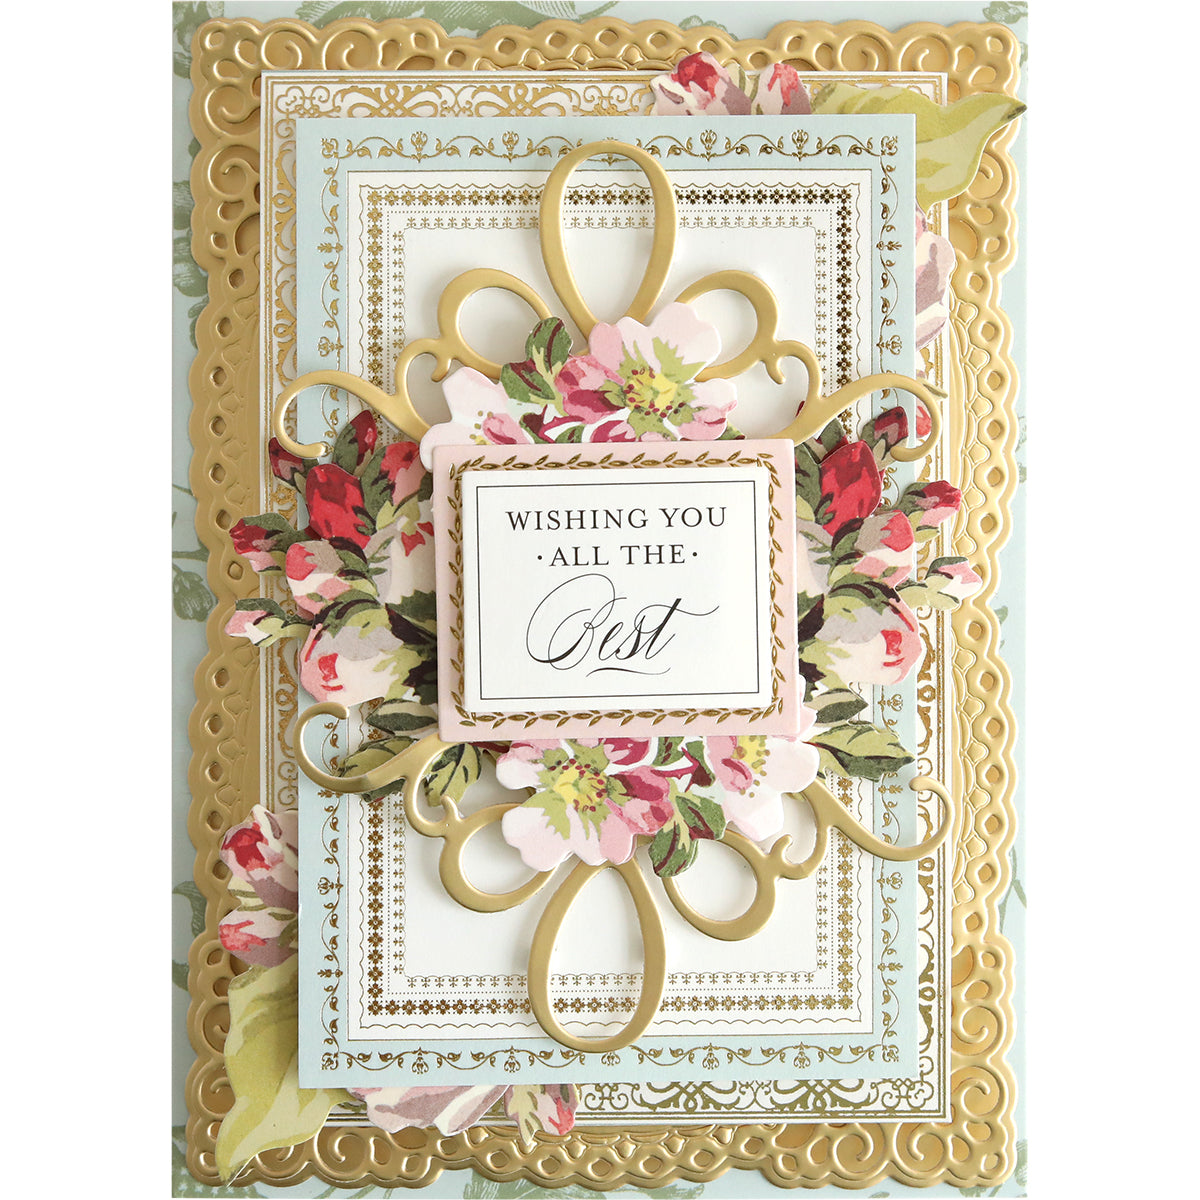 A Flourish Die Bundle adorned with decorative flowers and a gold frame.